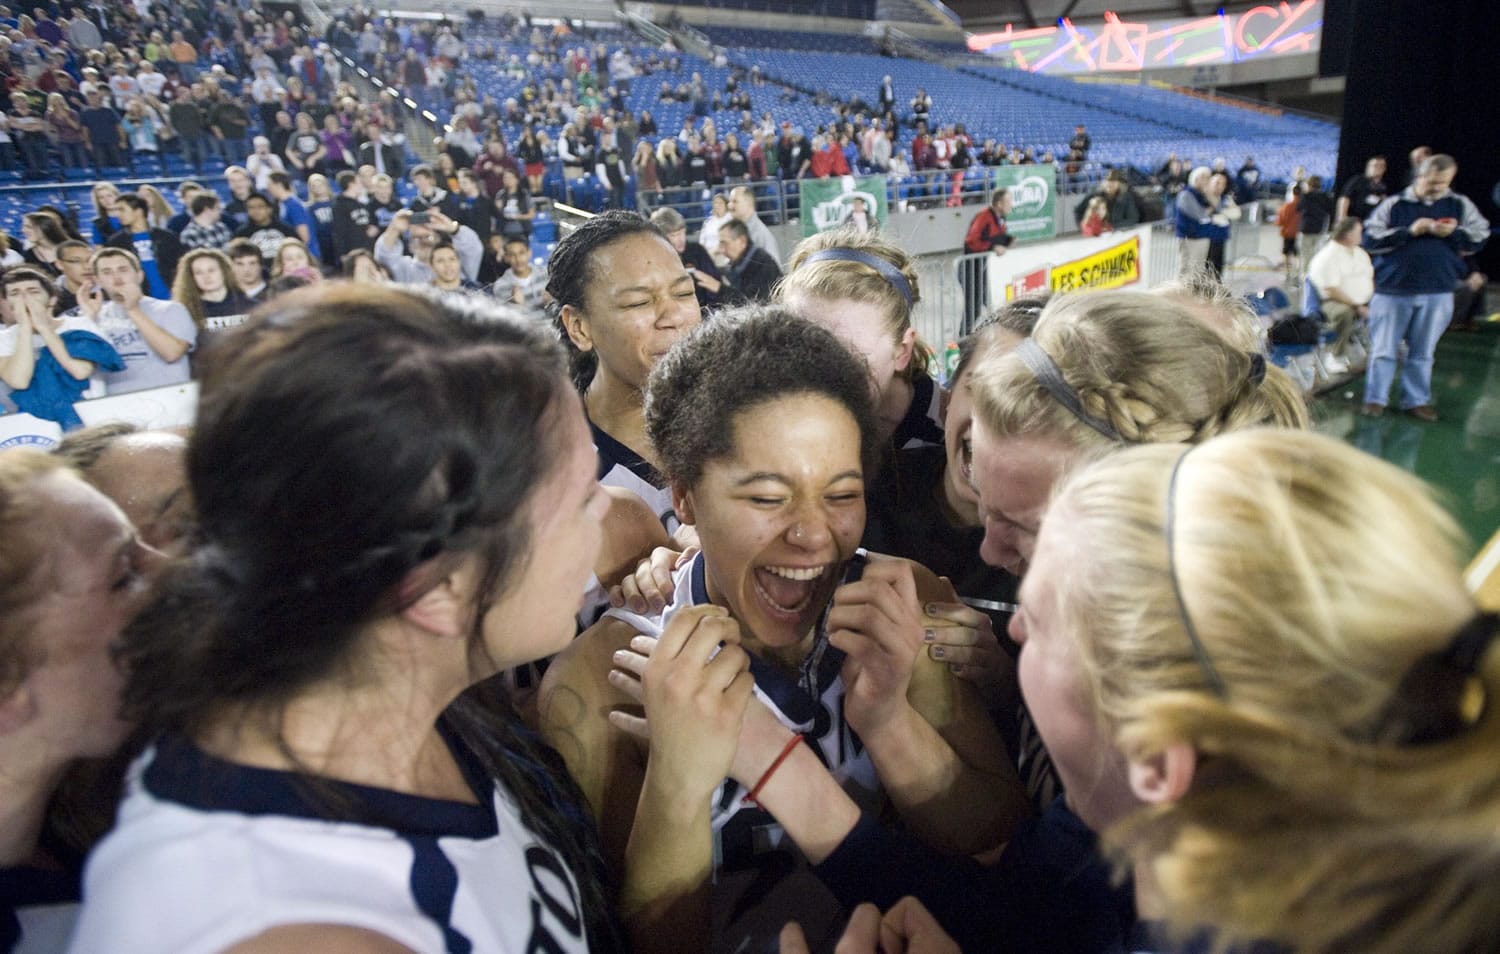 The Skyview girls celebrate after winning the 4A Girls State Basketball Tournament in Tacoma, Saturday, March 3, 2012 Skyview beat Central Valley 46-43.